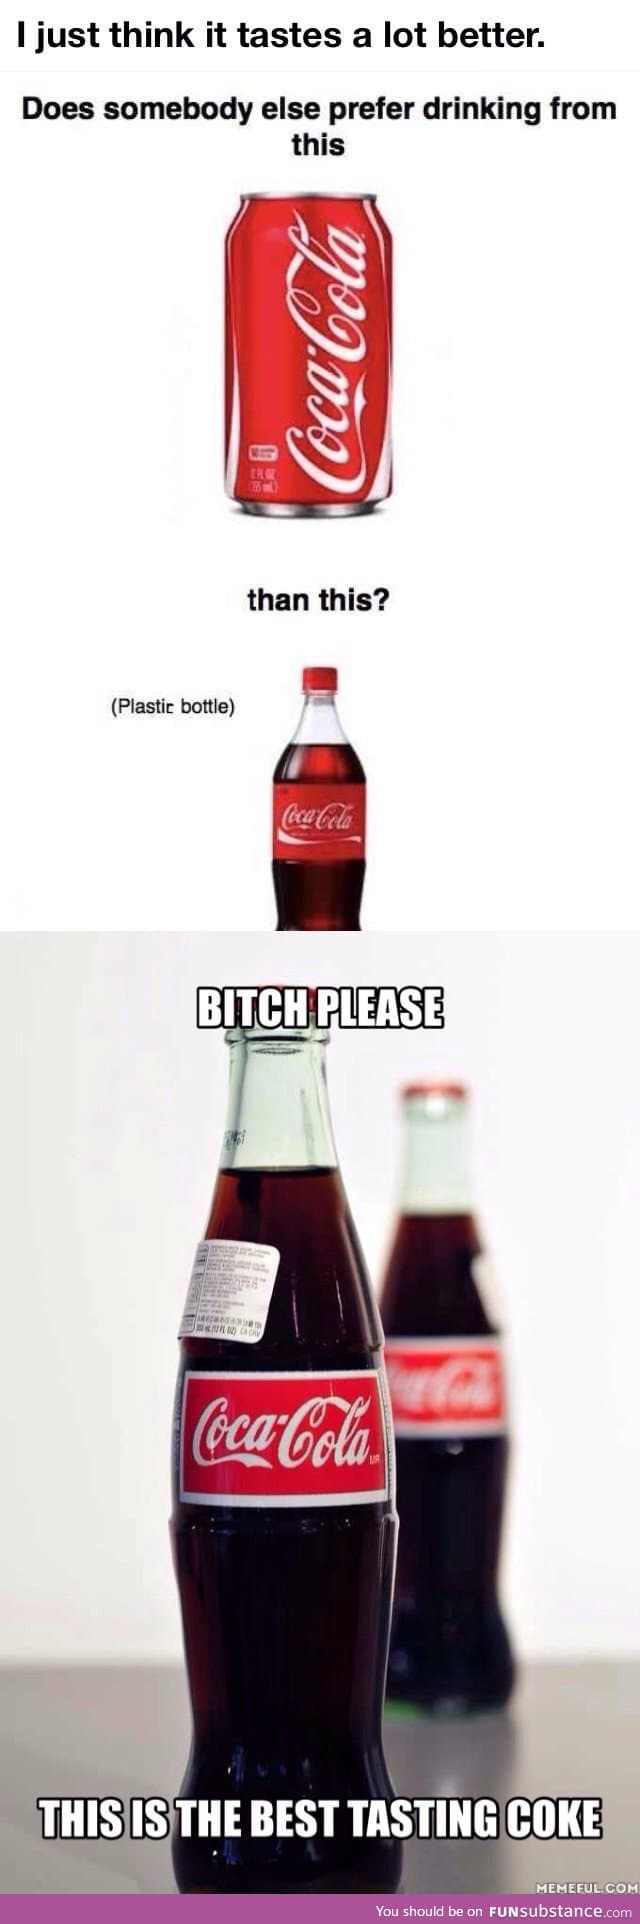 The best tasting coke comes in this